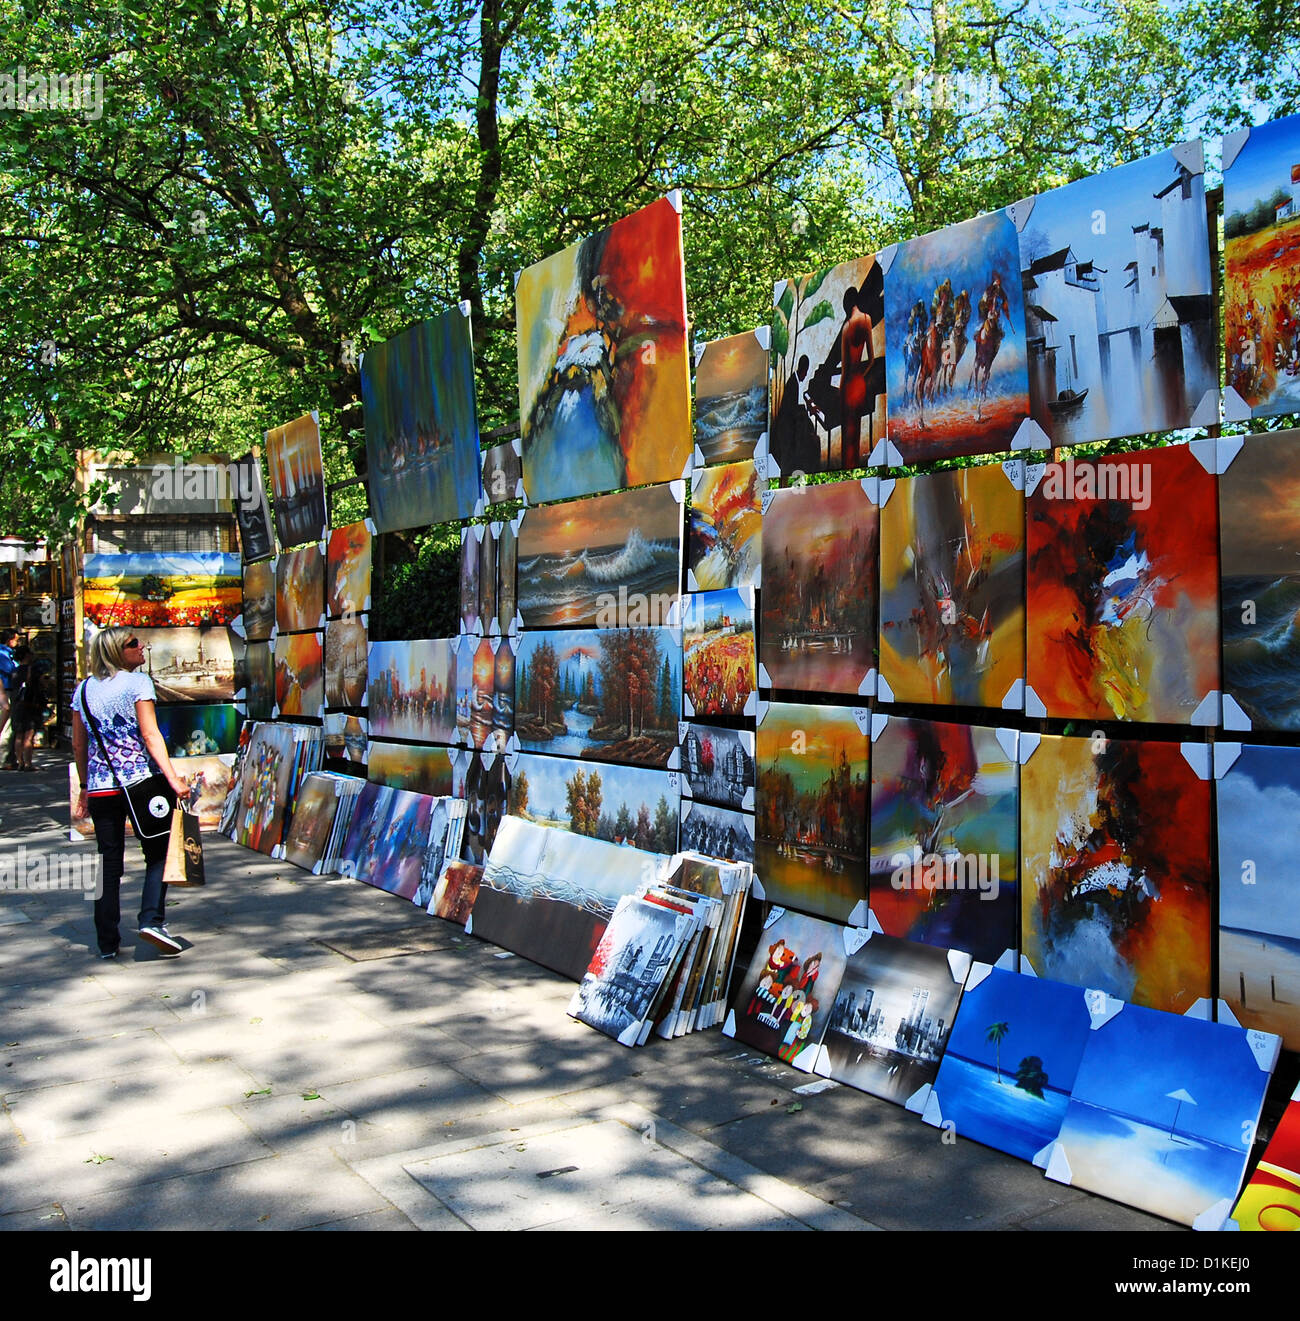 Weekly open air art market  on the railings along Green Park, Piccadilly, London, UK,  on a sunny Summer weekend. Stock Photo